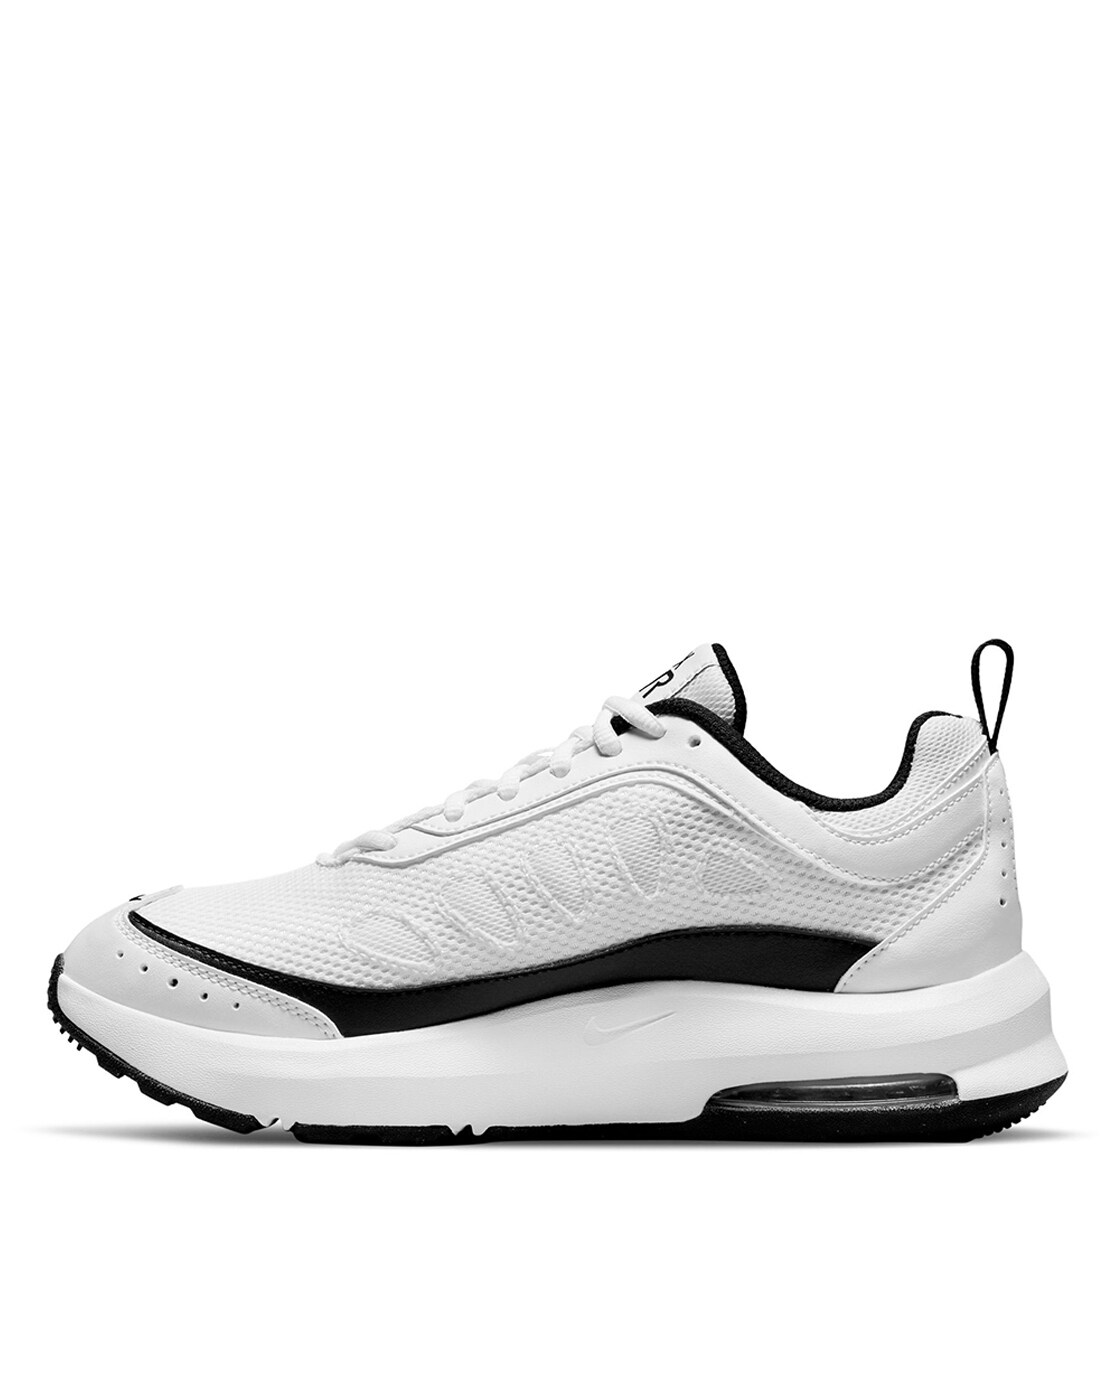 Buy Nike Women's W AIR MAX UP Sneakers 9.5 US at Amazon.in